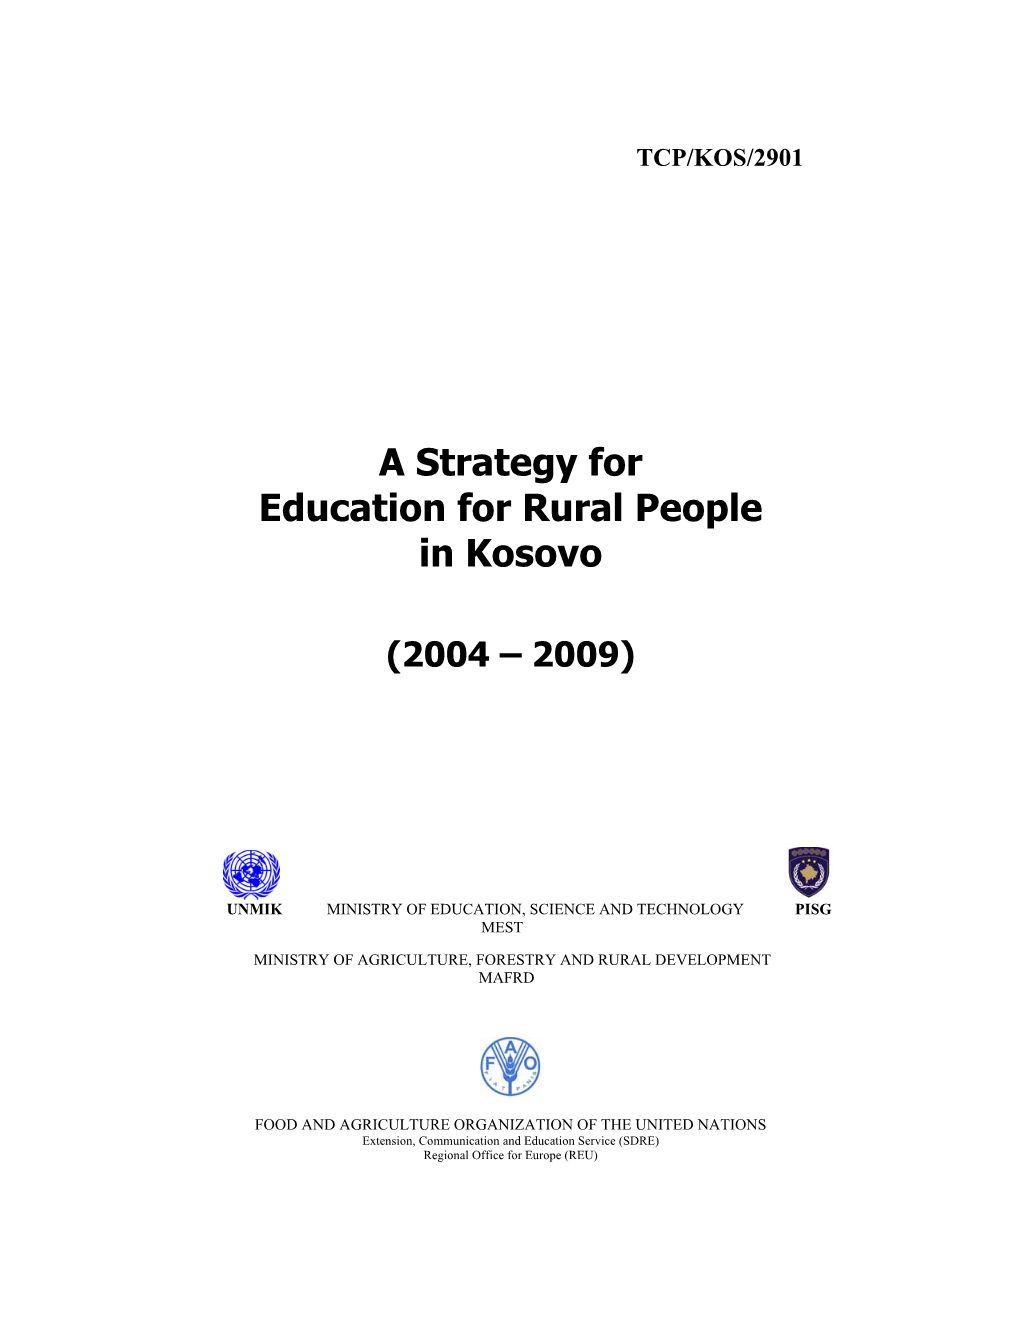 A Strategy for Education for Rural People in Kosovo